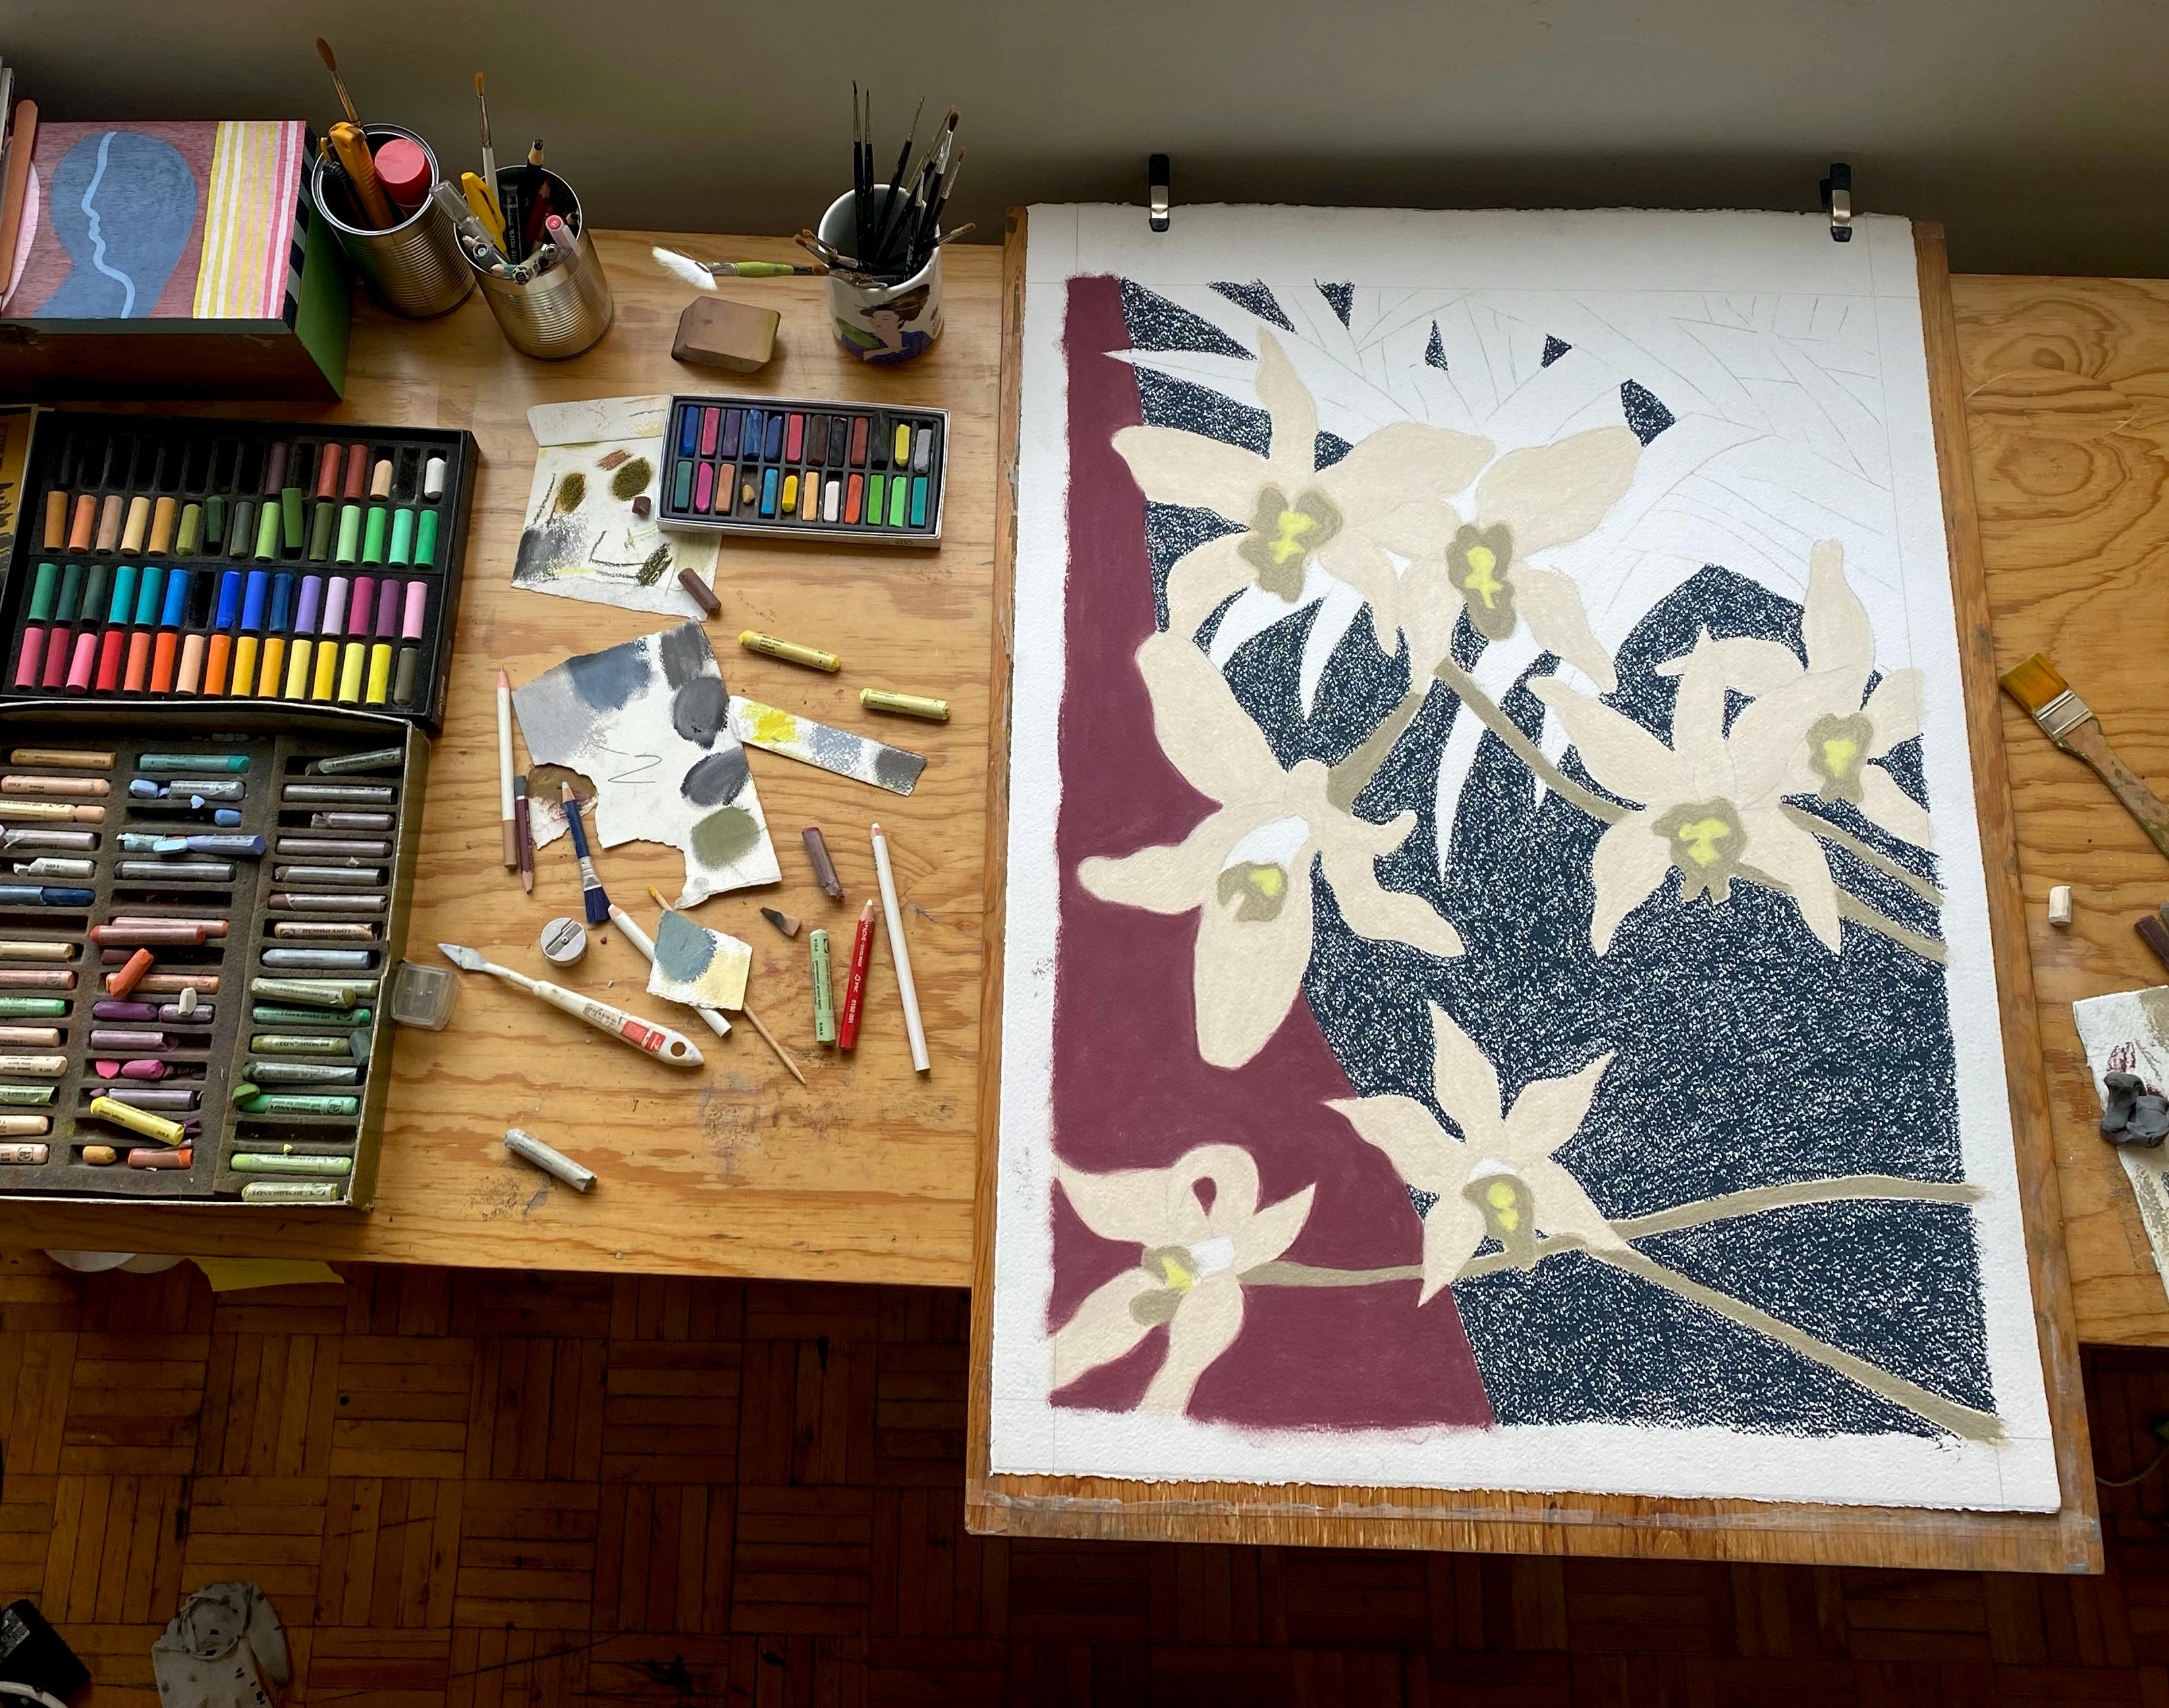 A wooden table in artist Rachel Levit Ruiz studio, covered with boxes of pastels and an in-progress drawing of a flower.